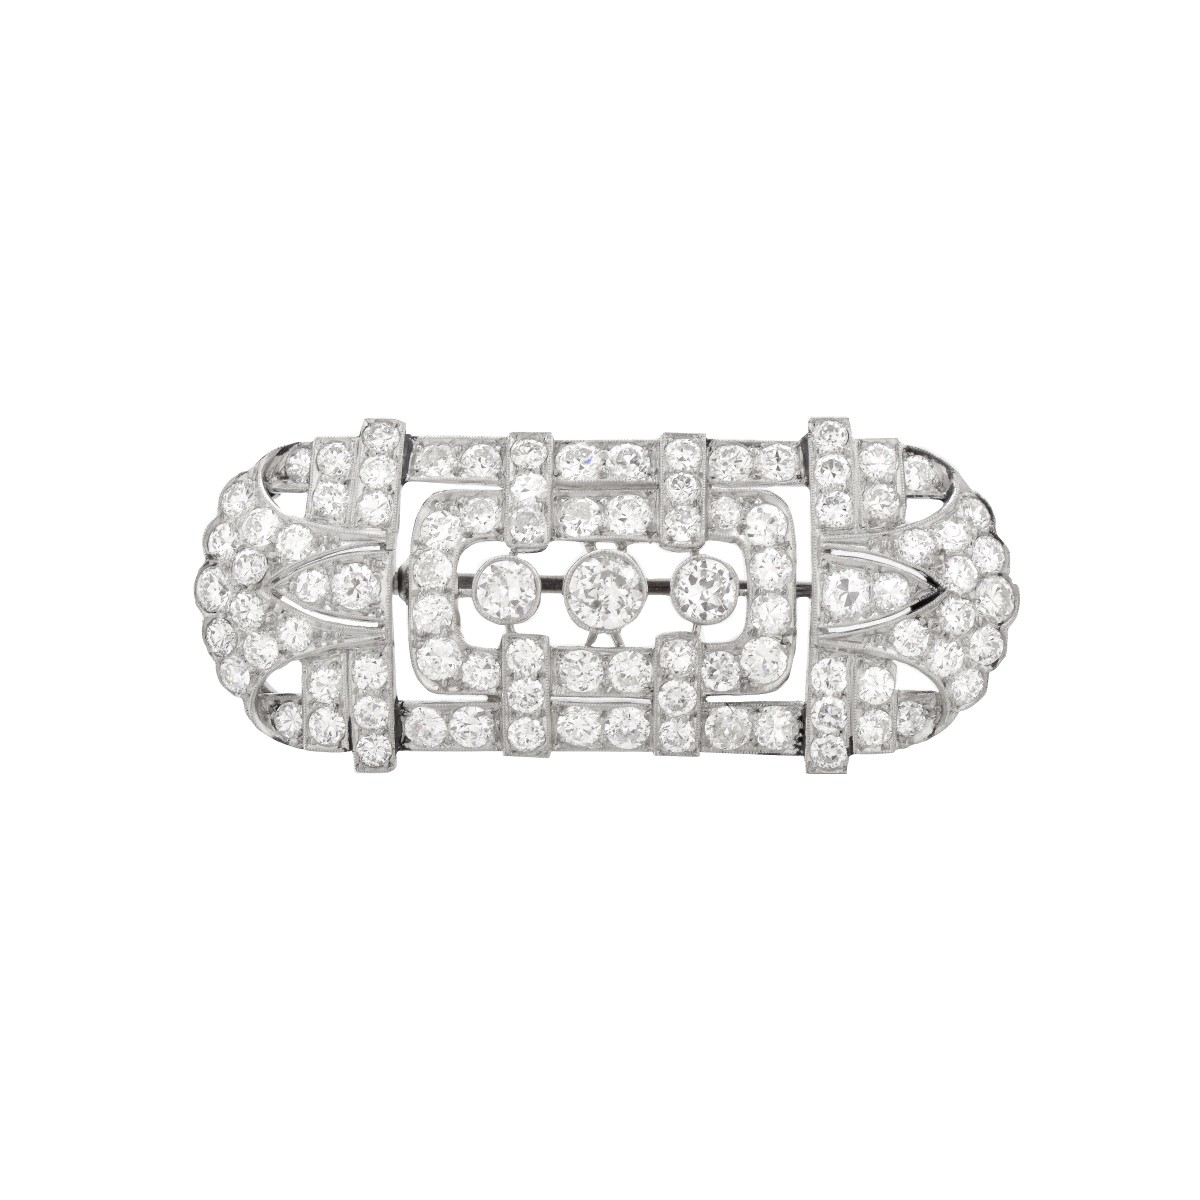 French Deco Diamond and Platinum Brooch